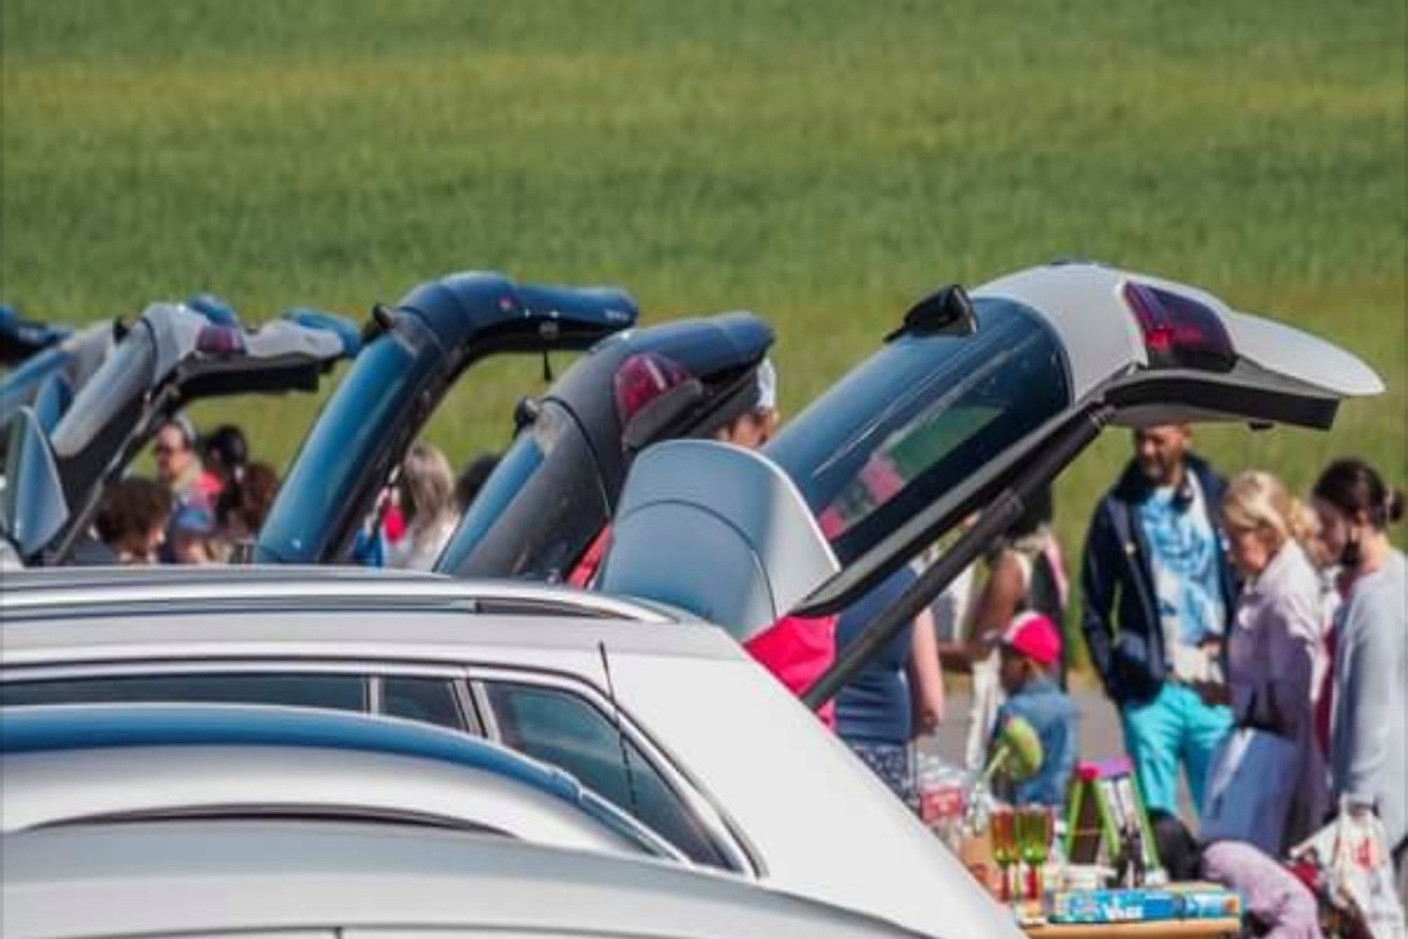 The British Ladies Club organised its annual car boot sale on Saturday 14 May.  BLC